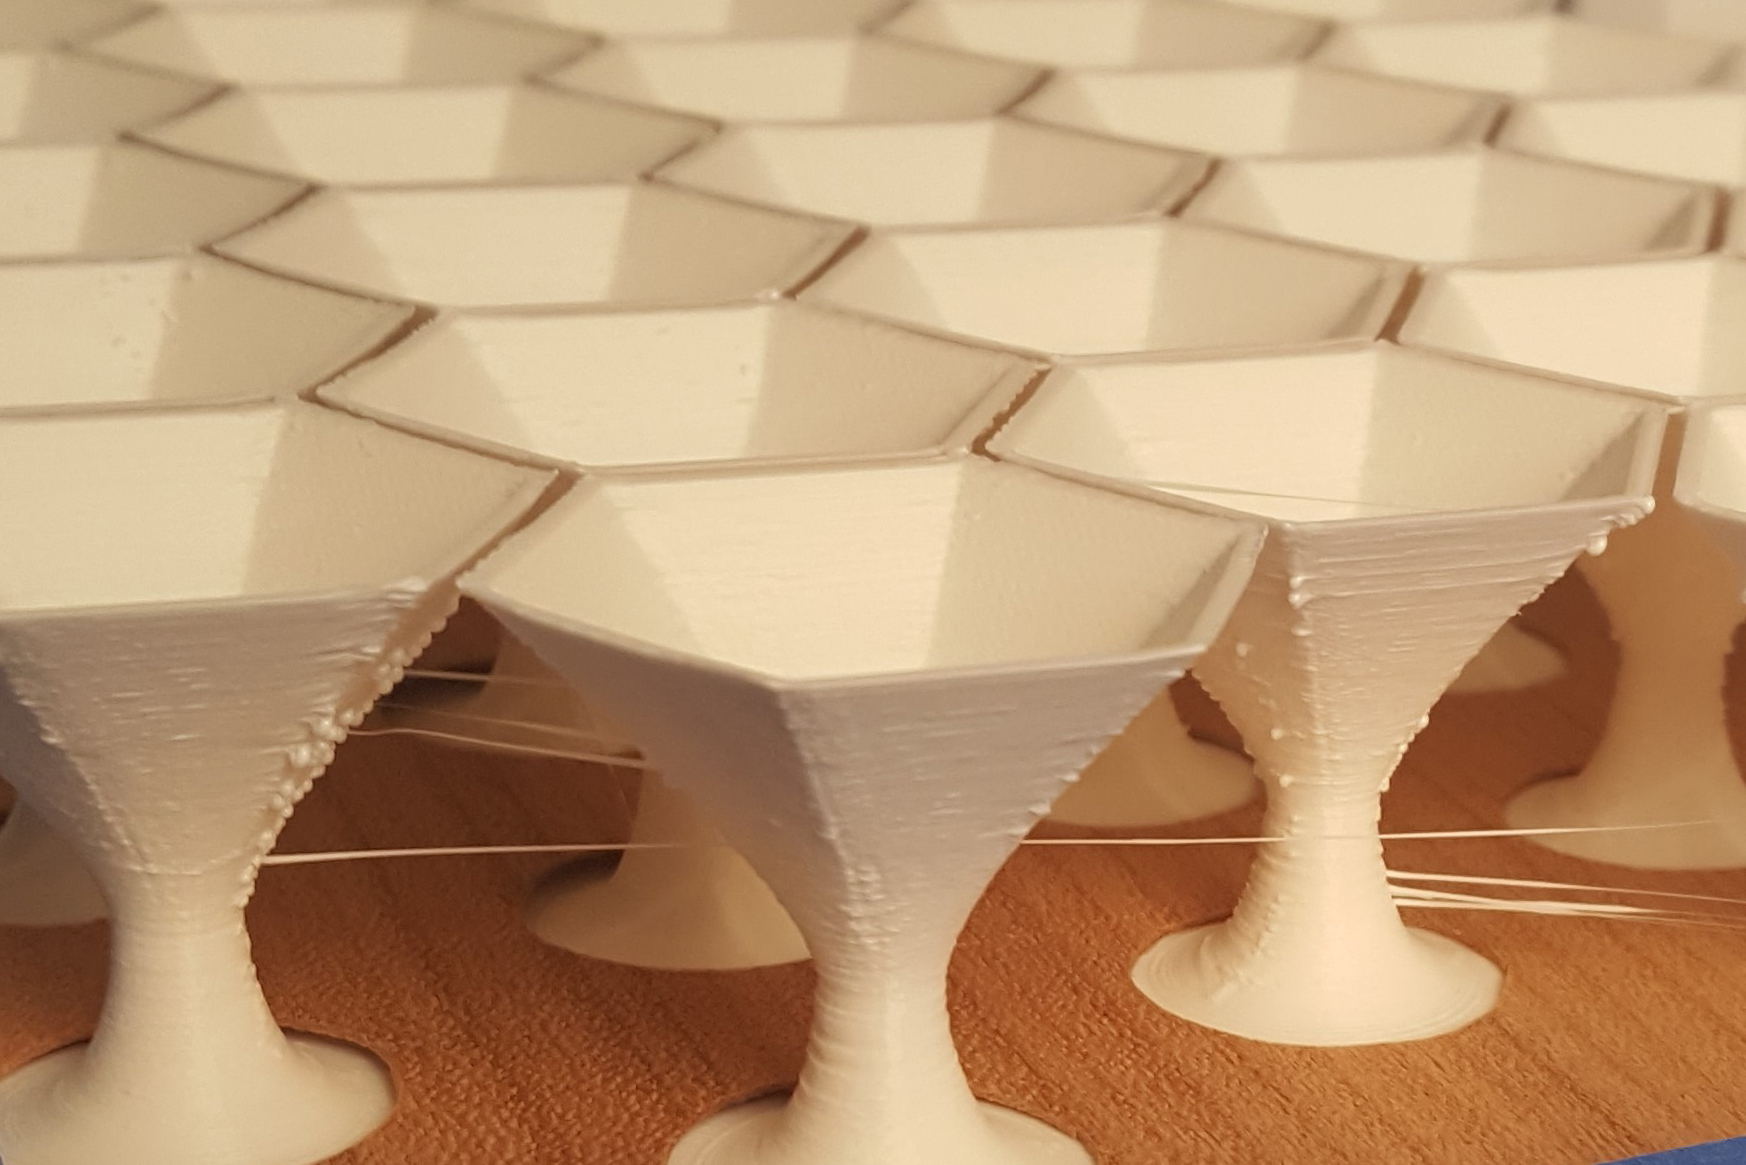 An experiment in combining 3D printing with molded plywood